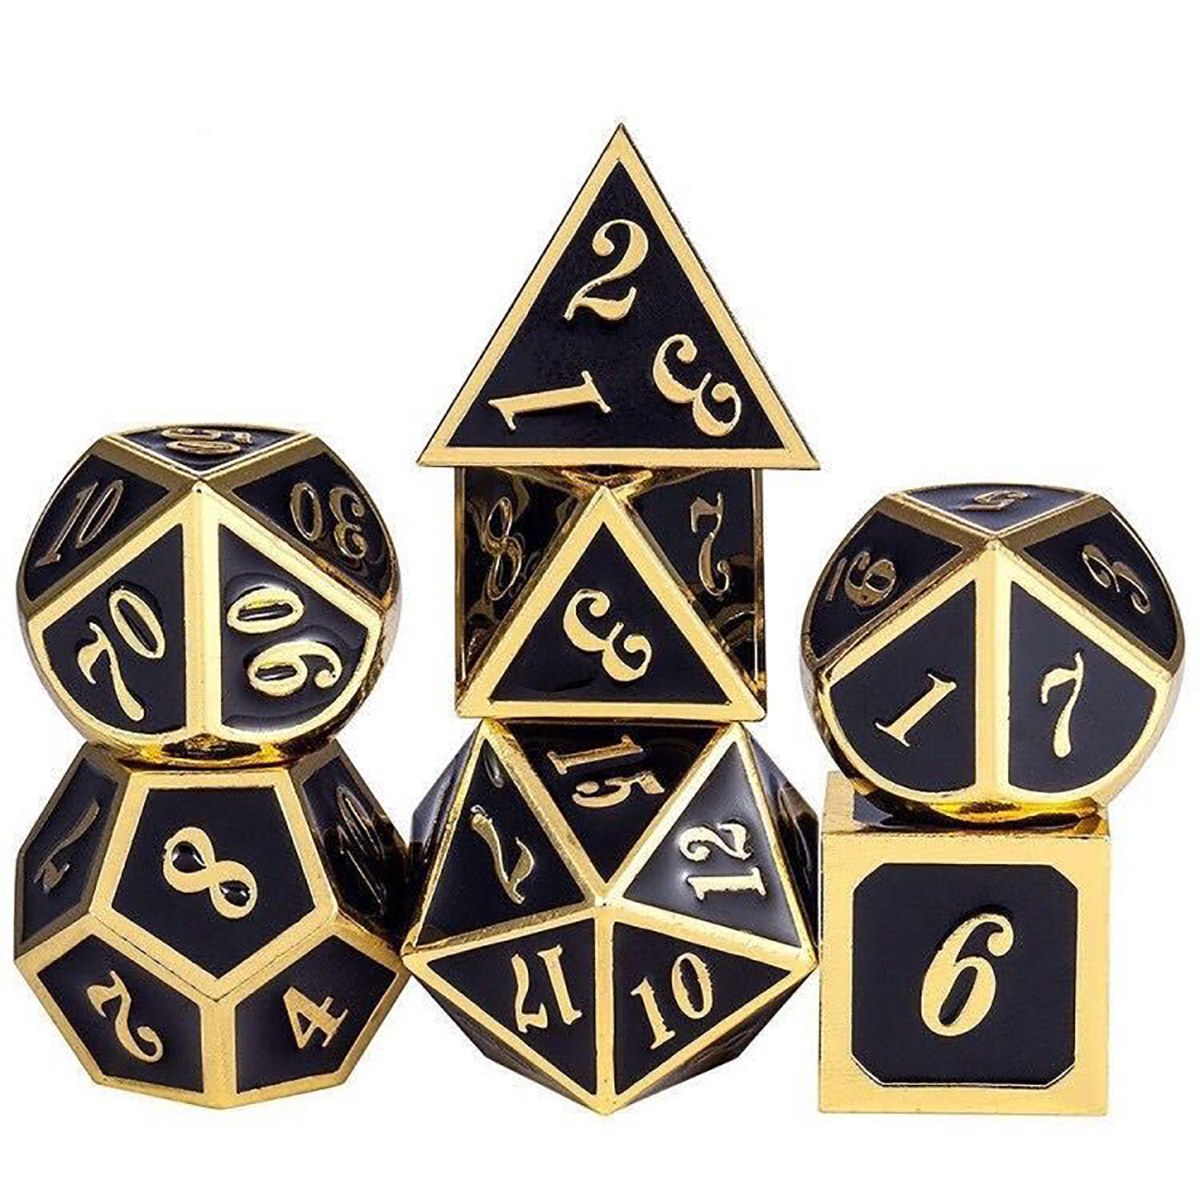 7-PcsSet-Metal-Dice-Set-Role-Playing-Dragons-Table-Board-Game-Toys-With-Cloth-Bag-Bar-Party-Game-Dic-1672532-6